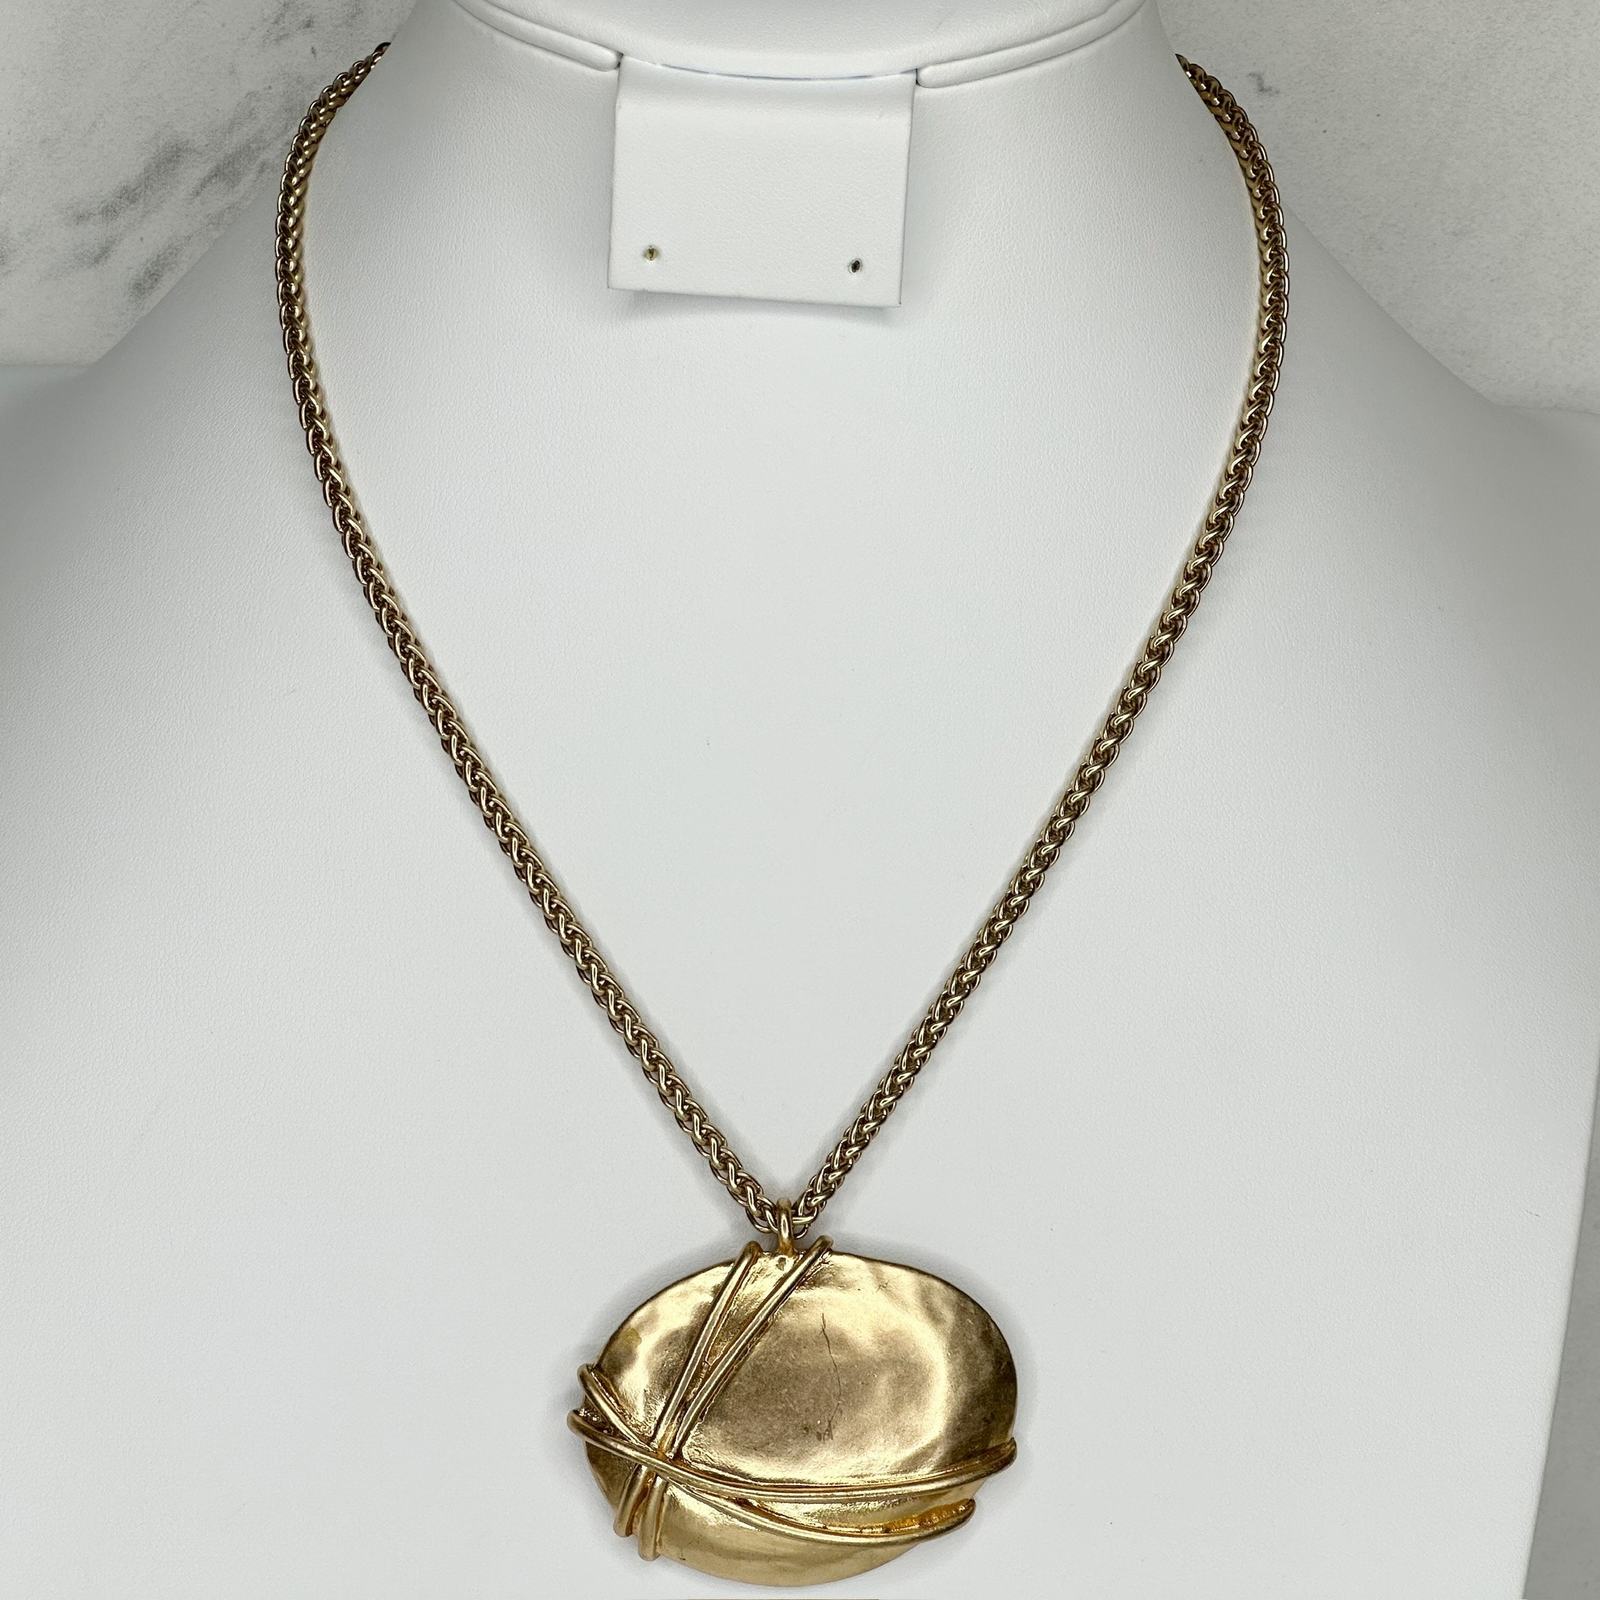 Primary image for Chico's Hammered Metal Pendant Gold Tone Necklace